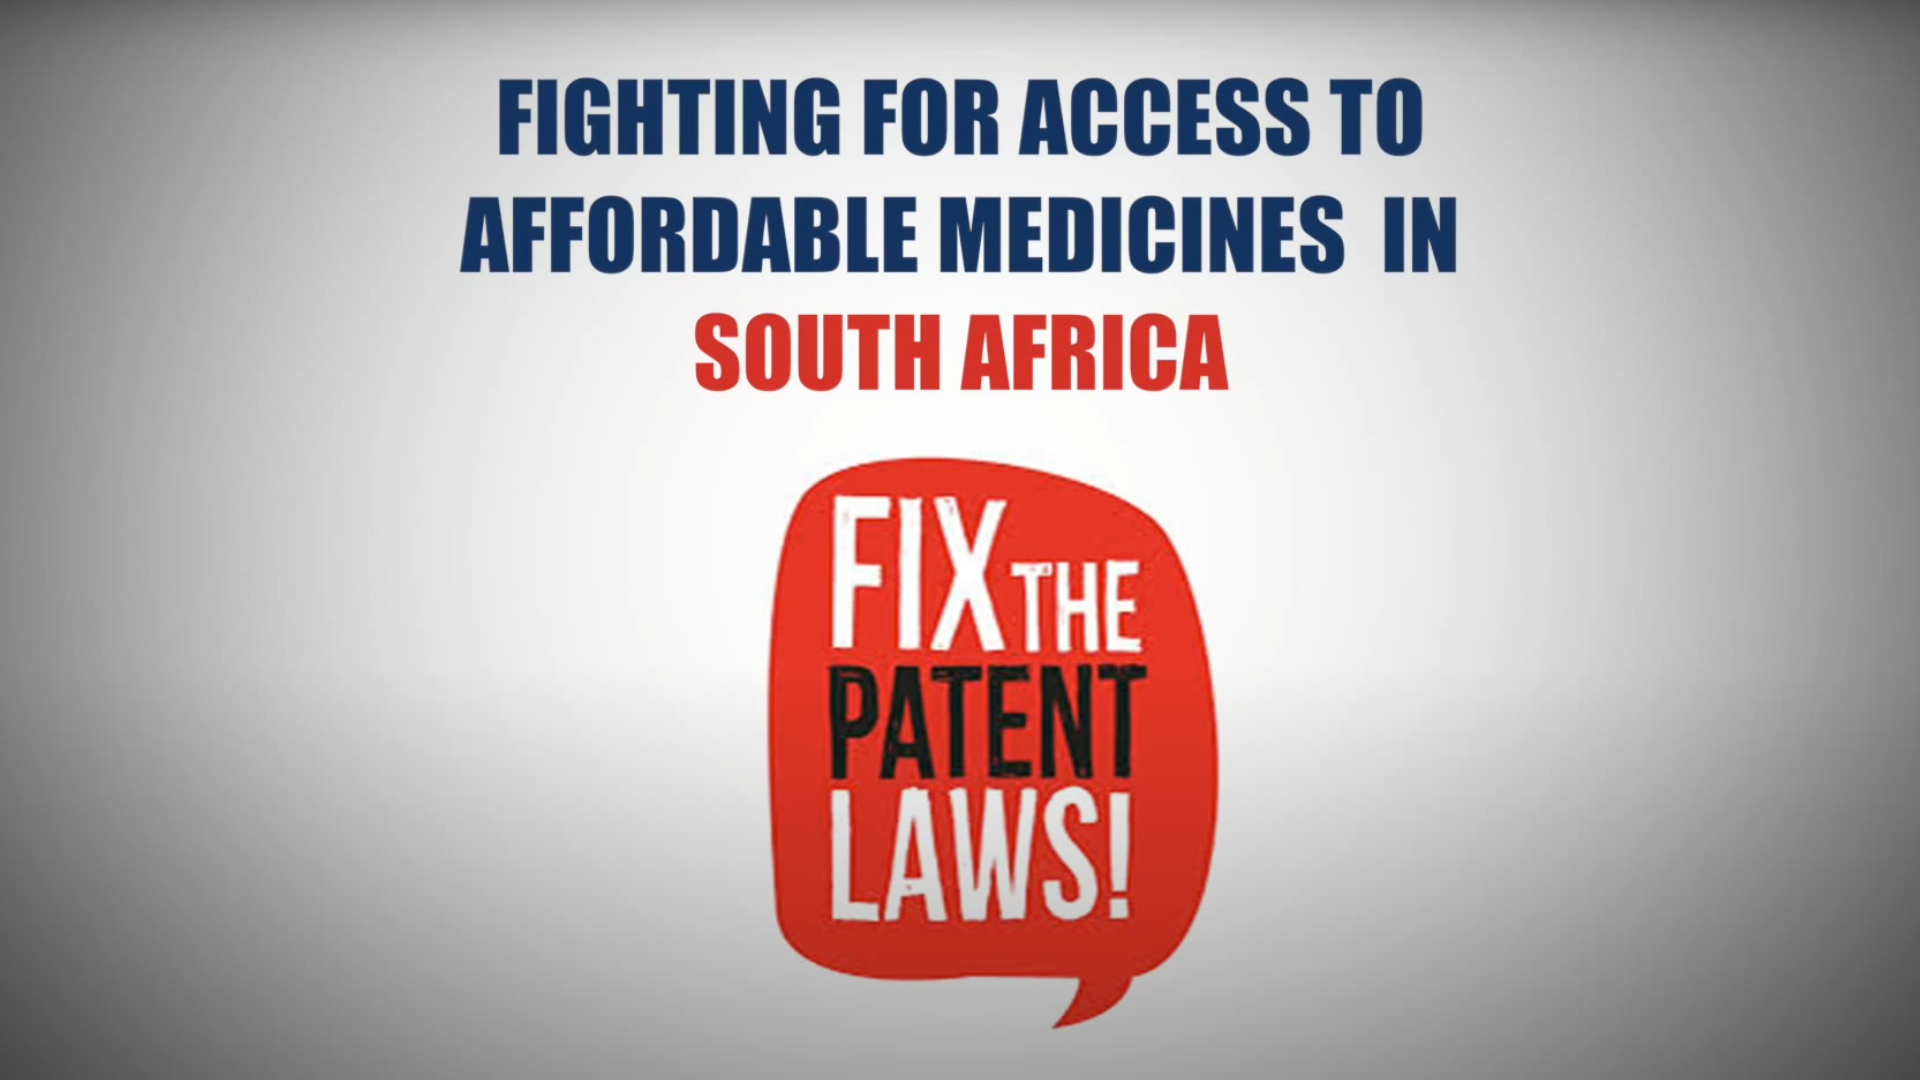 Encouraging text to fix the patent laws in South Africa.